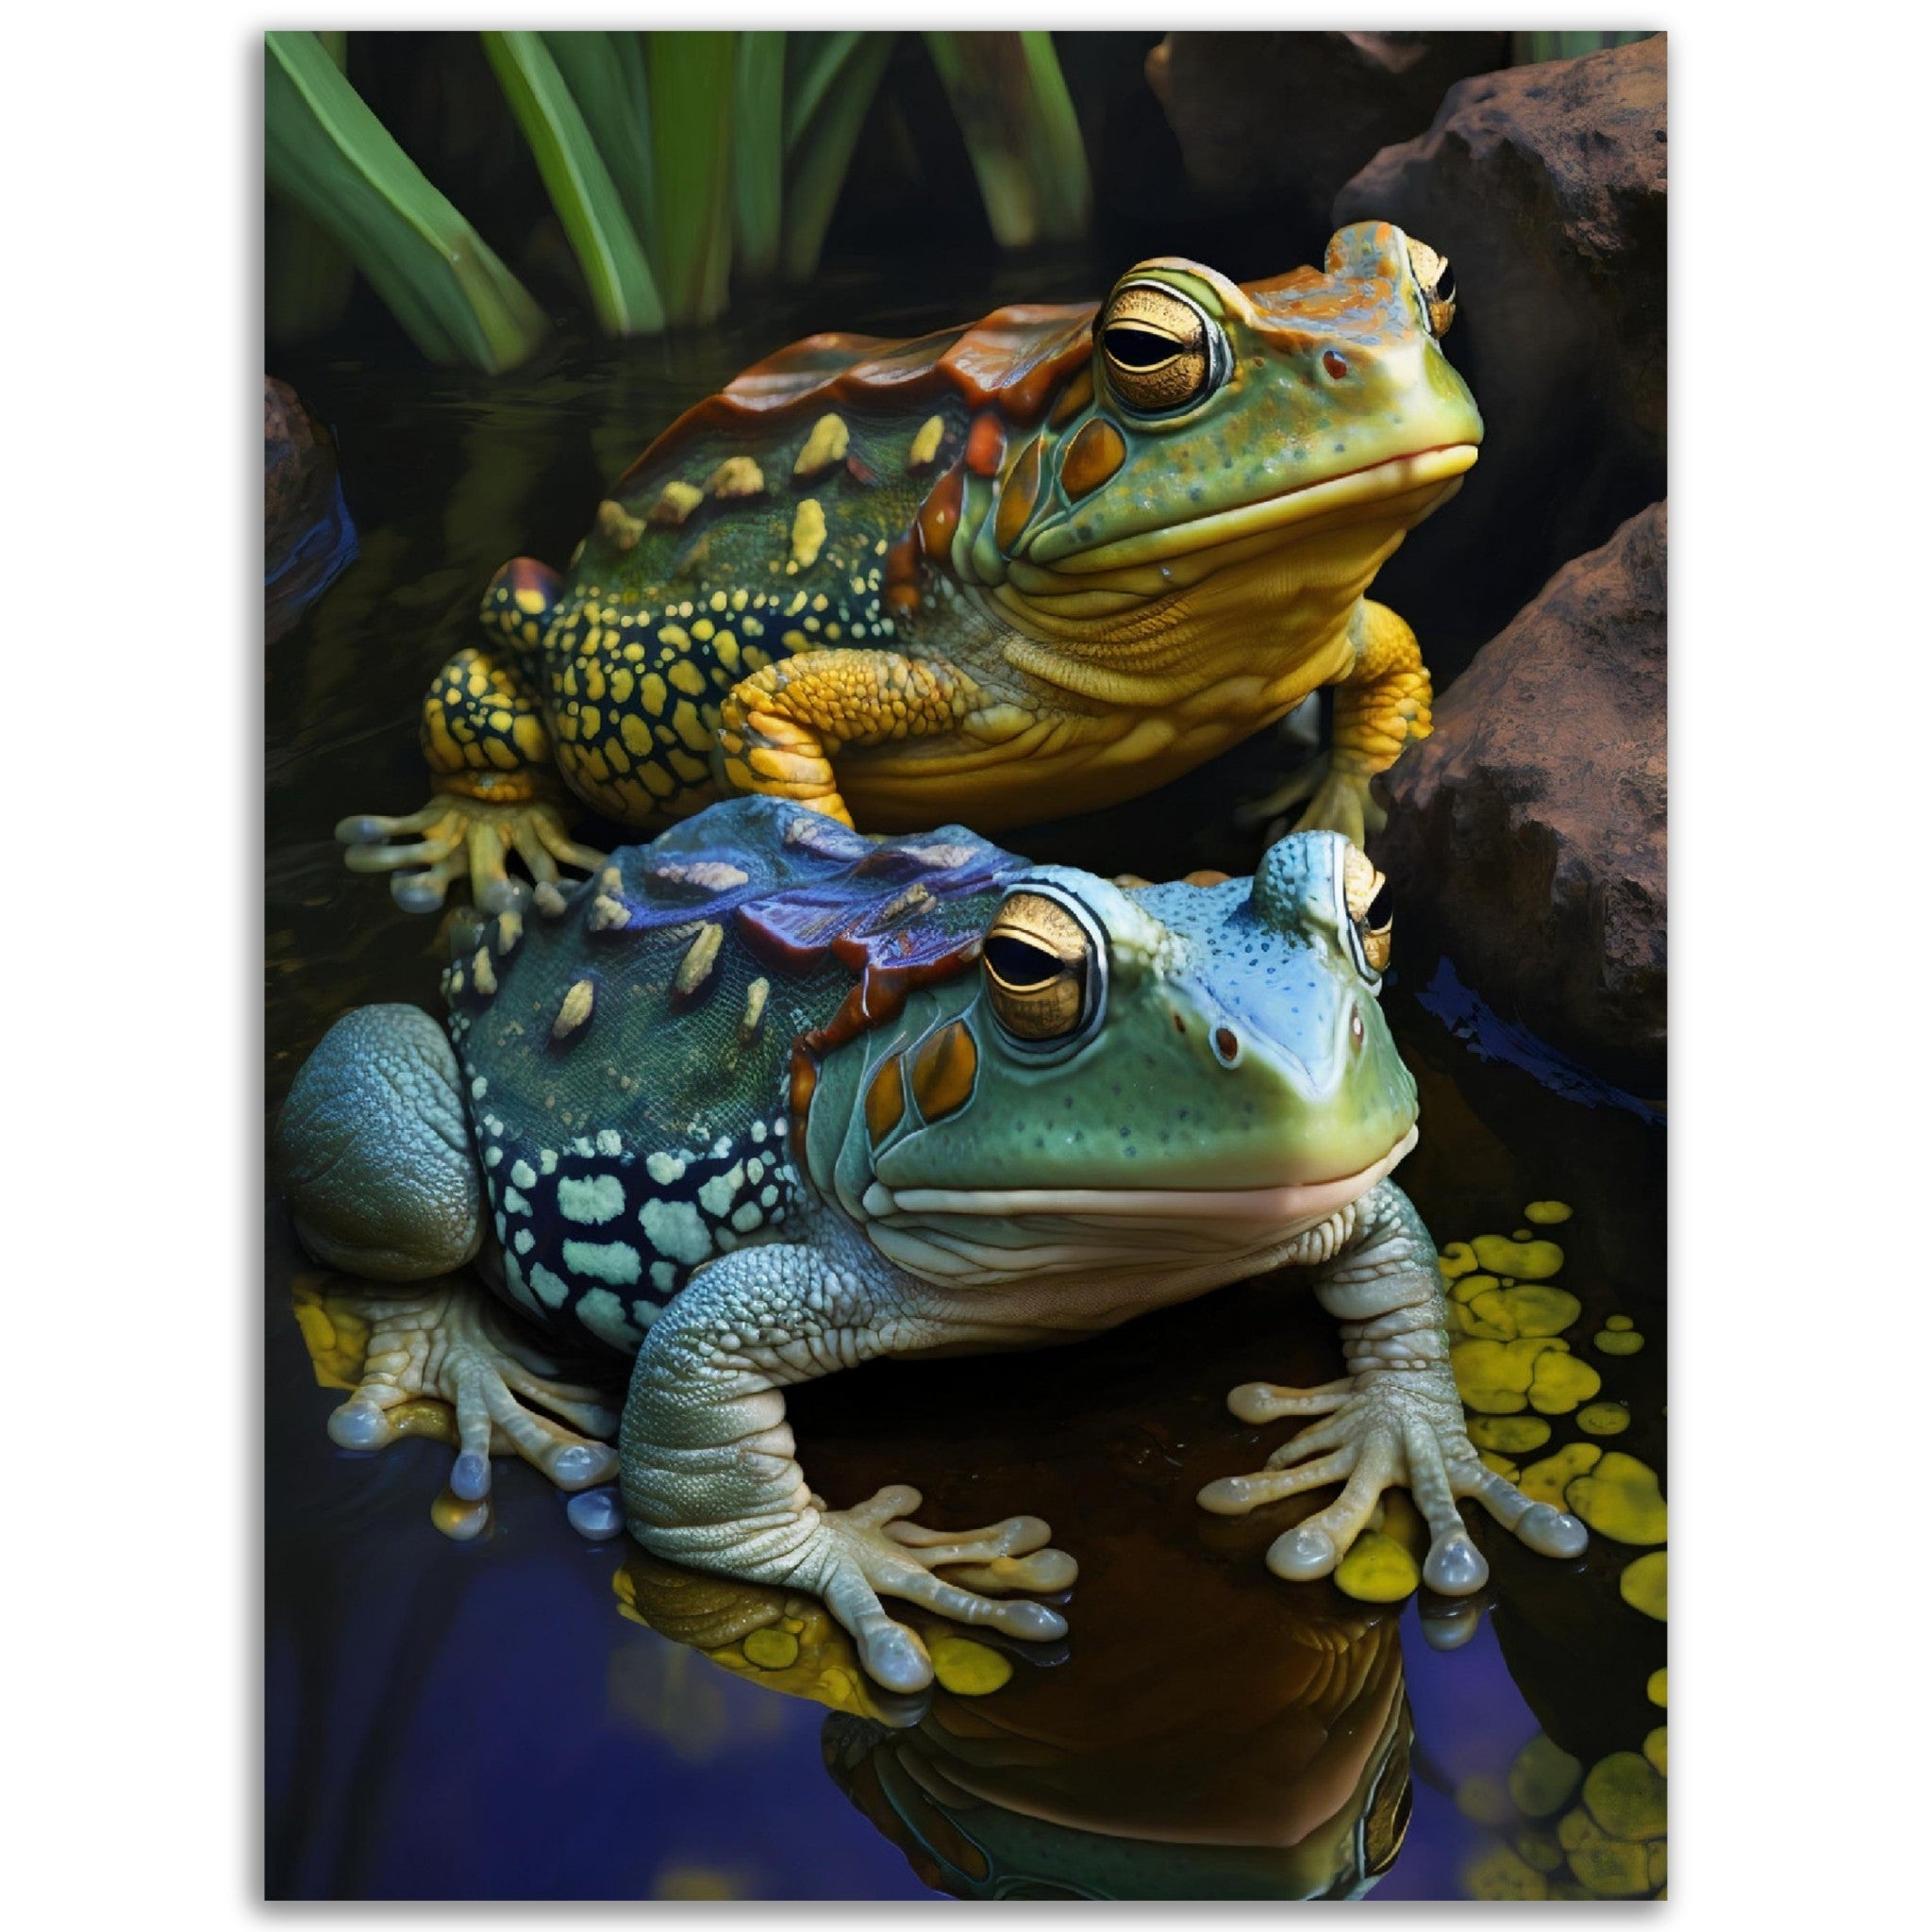 Two African Bullfrogs - immersiarts